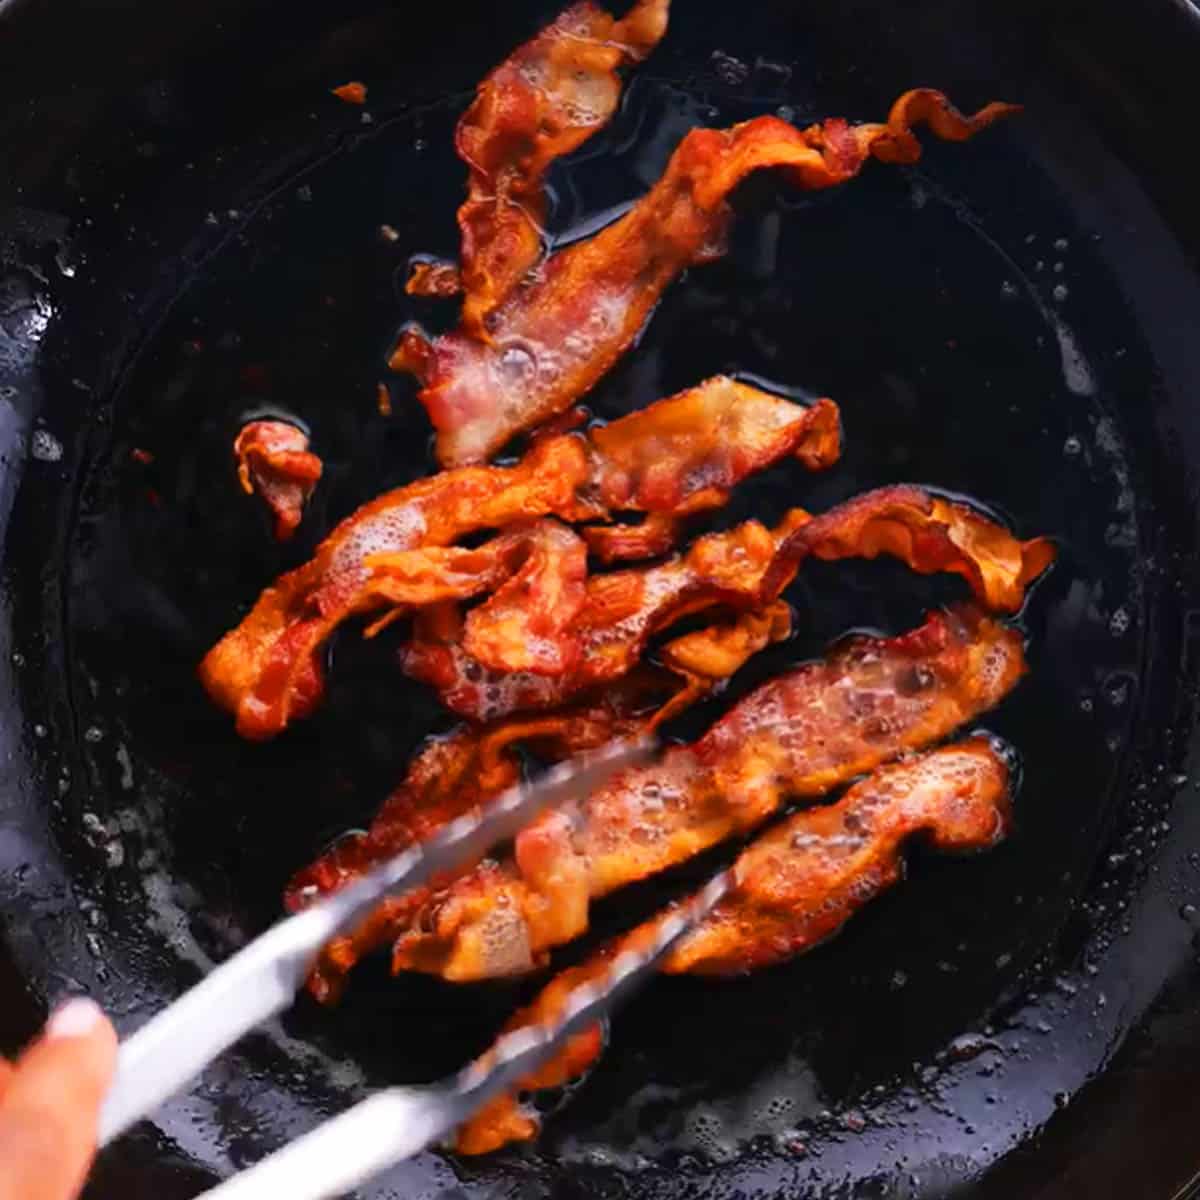 Hand holding tongs while adjusting bacon frying in a pan.